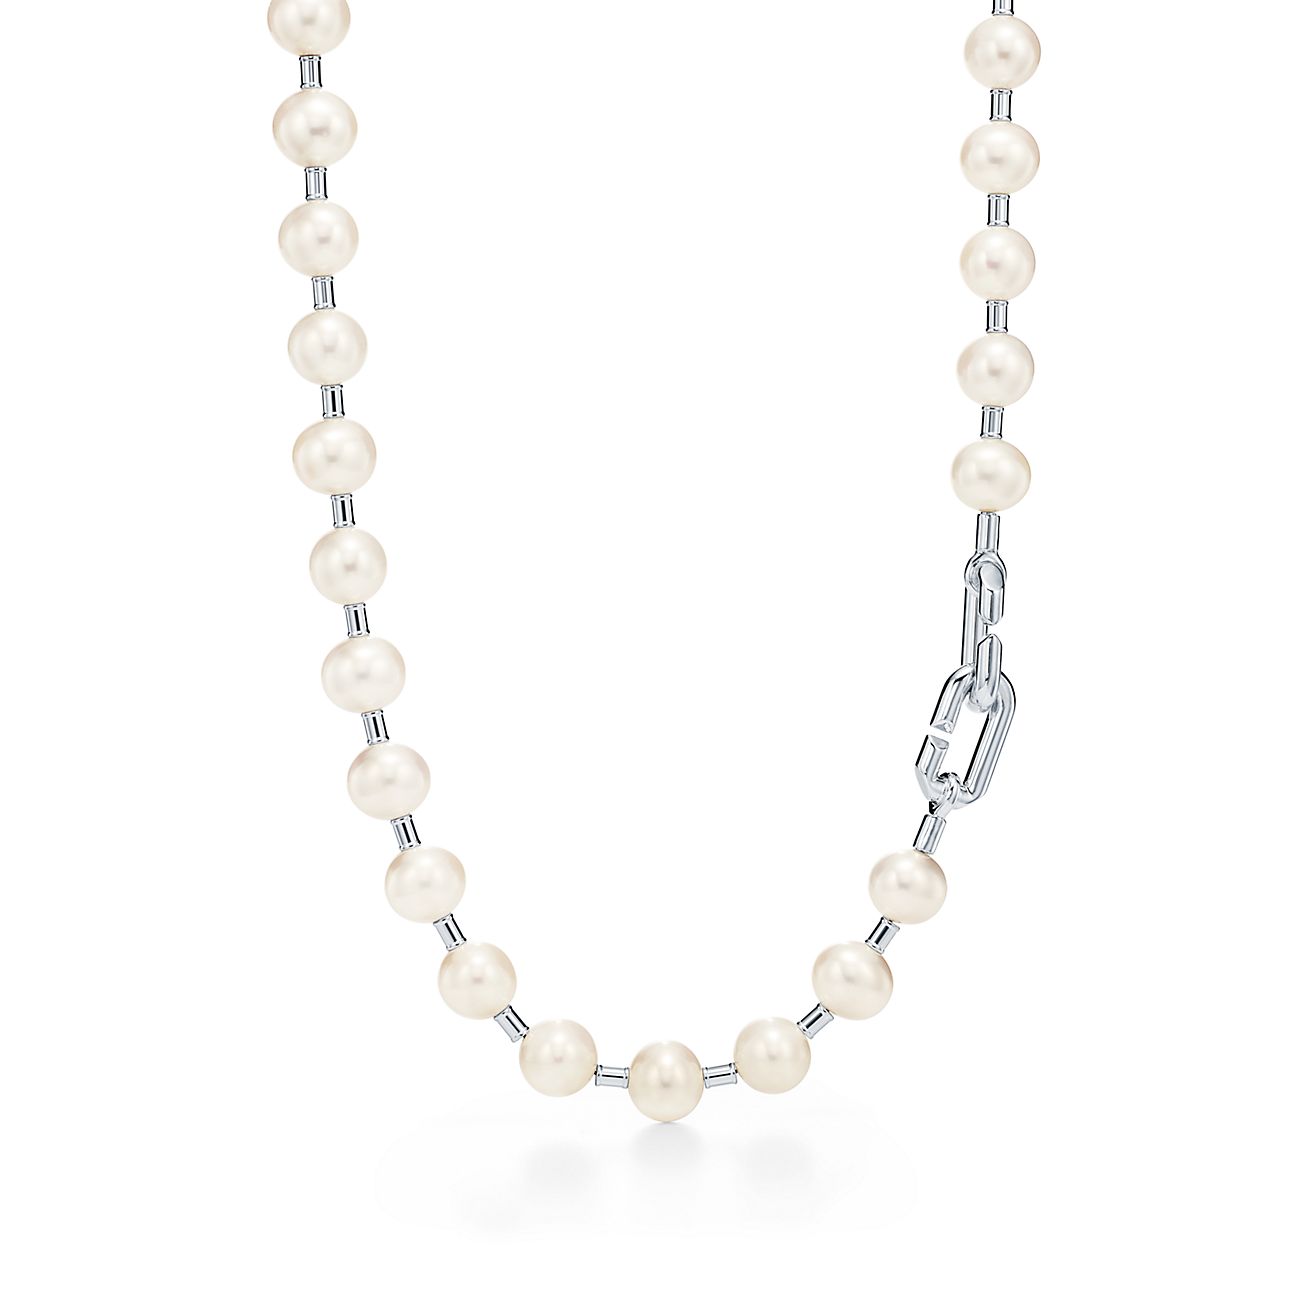 Tiffany City HardWearFreshwater Pearl Necklace in Sterling Silver, 16"